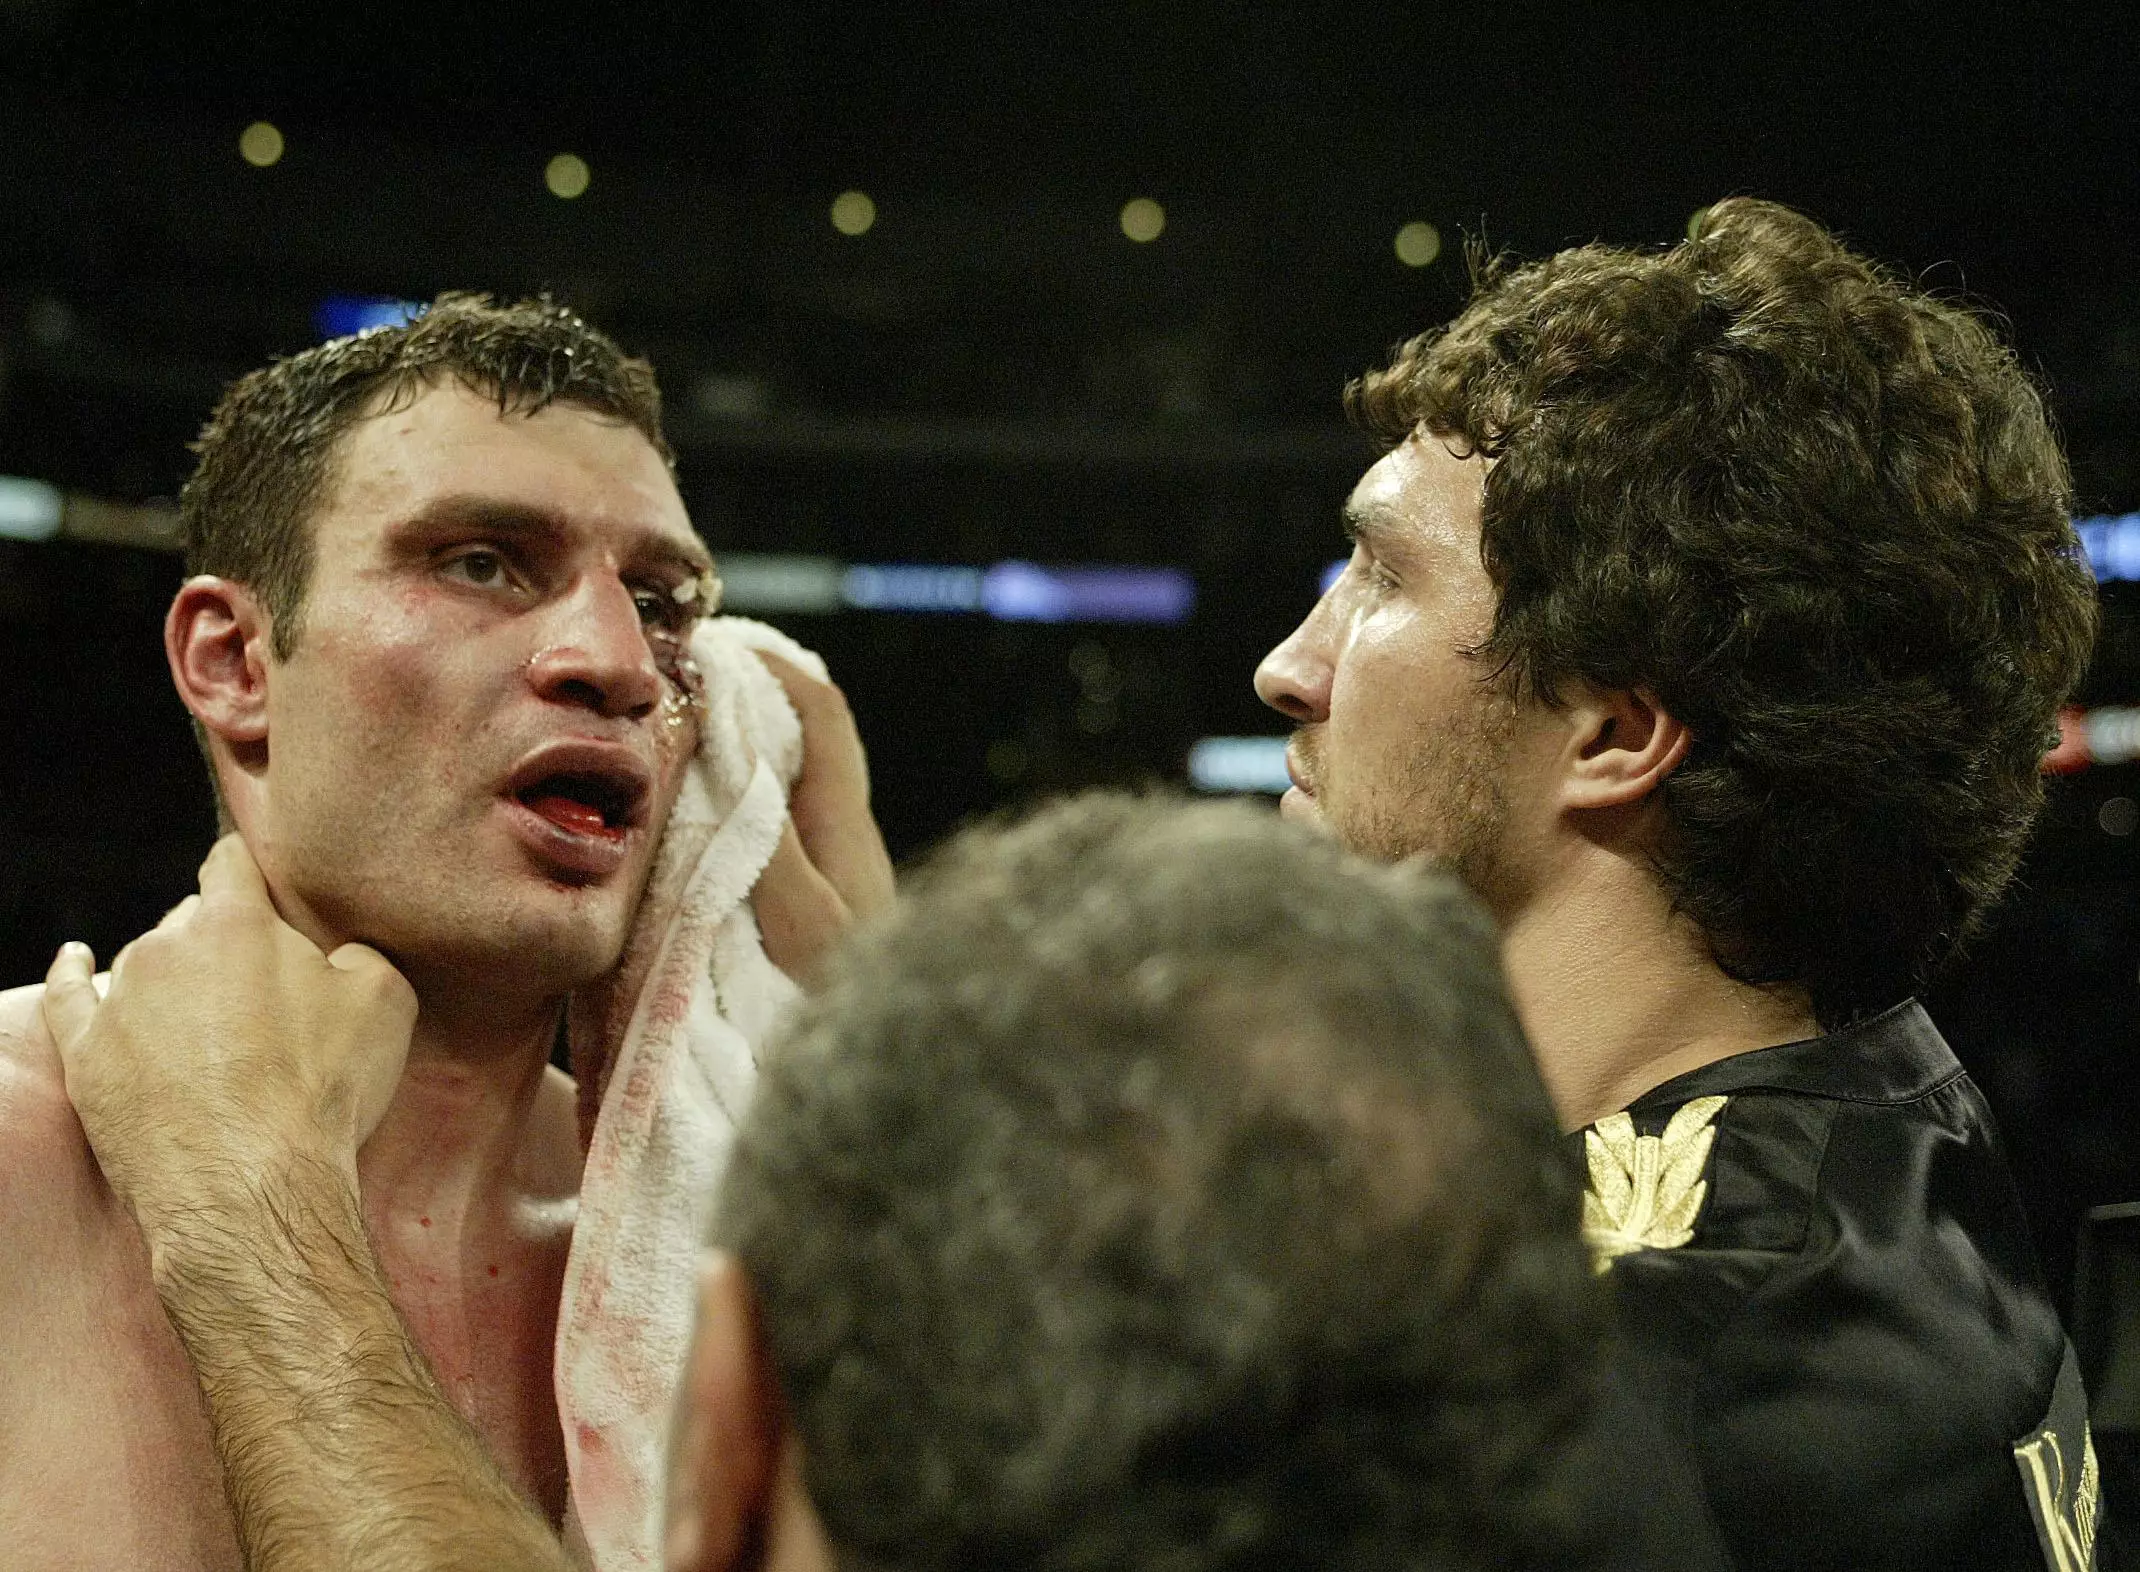 Vitali's corner attempt to clean up his face. Image: PA